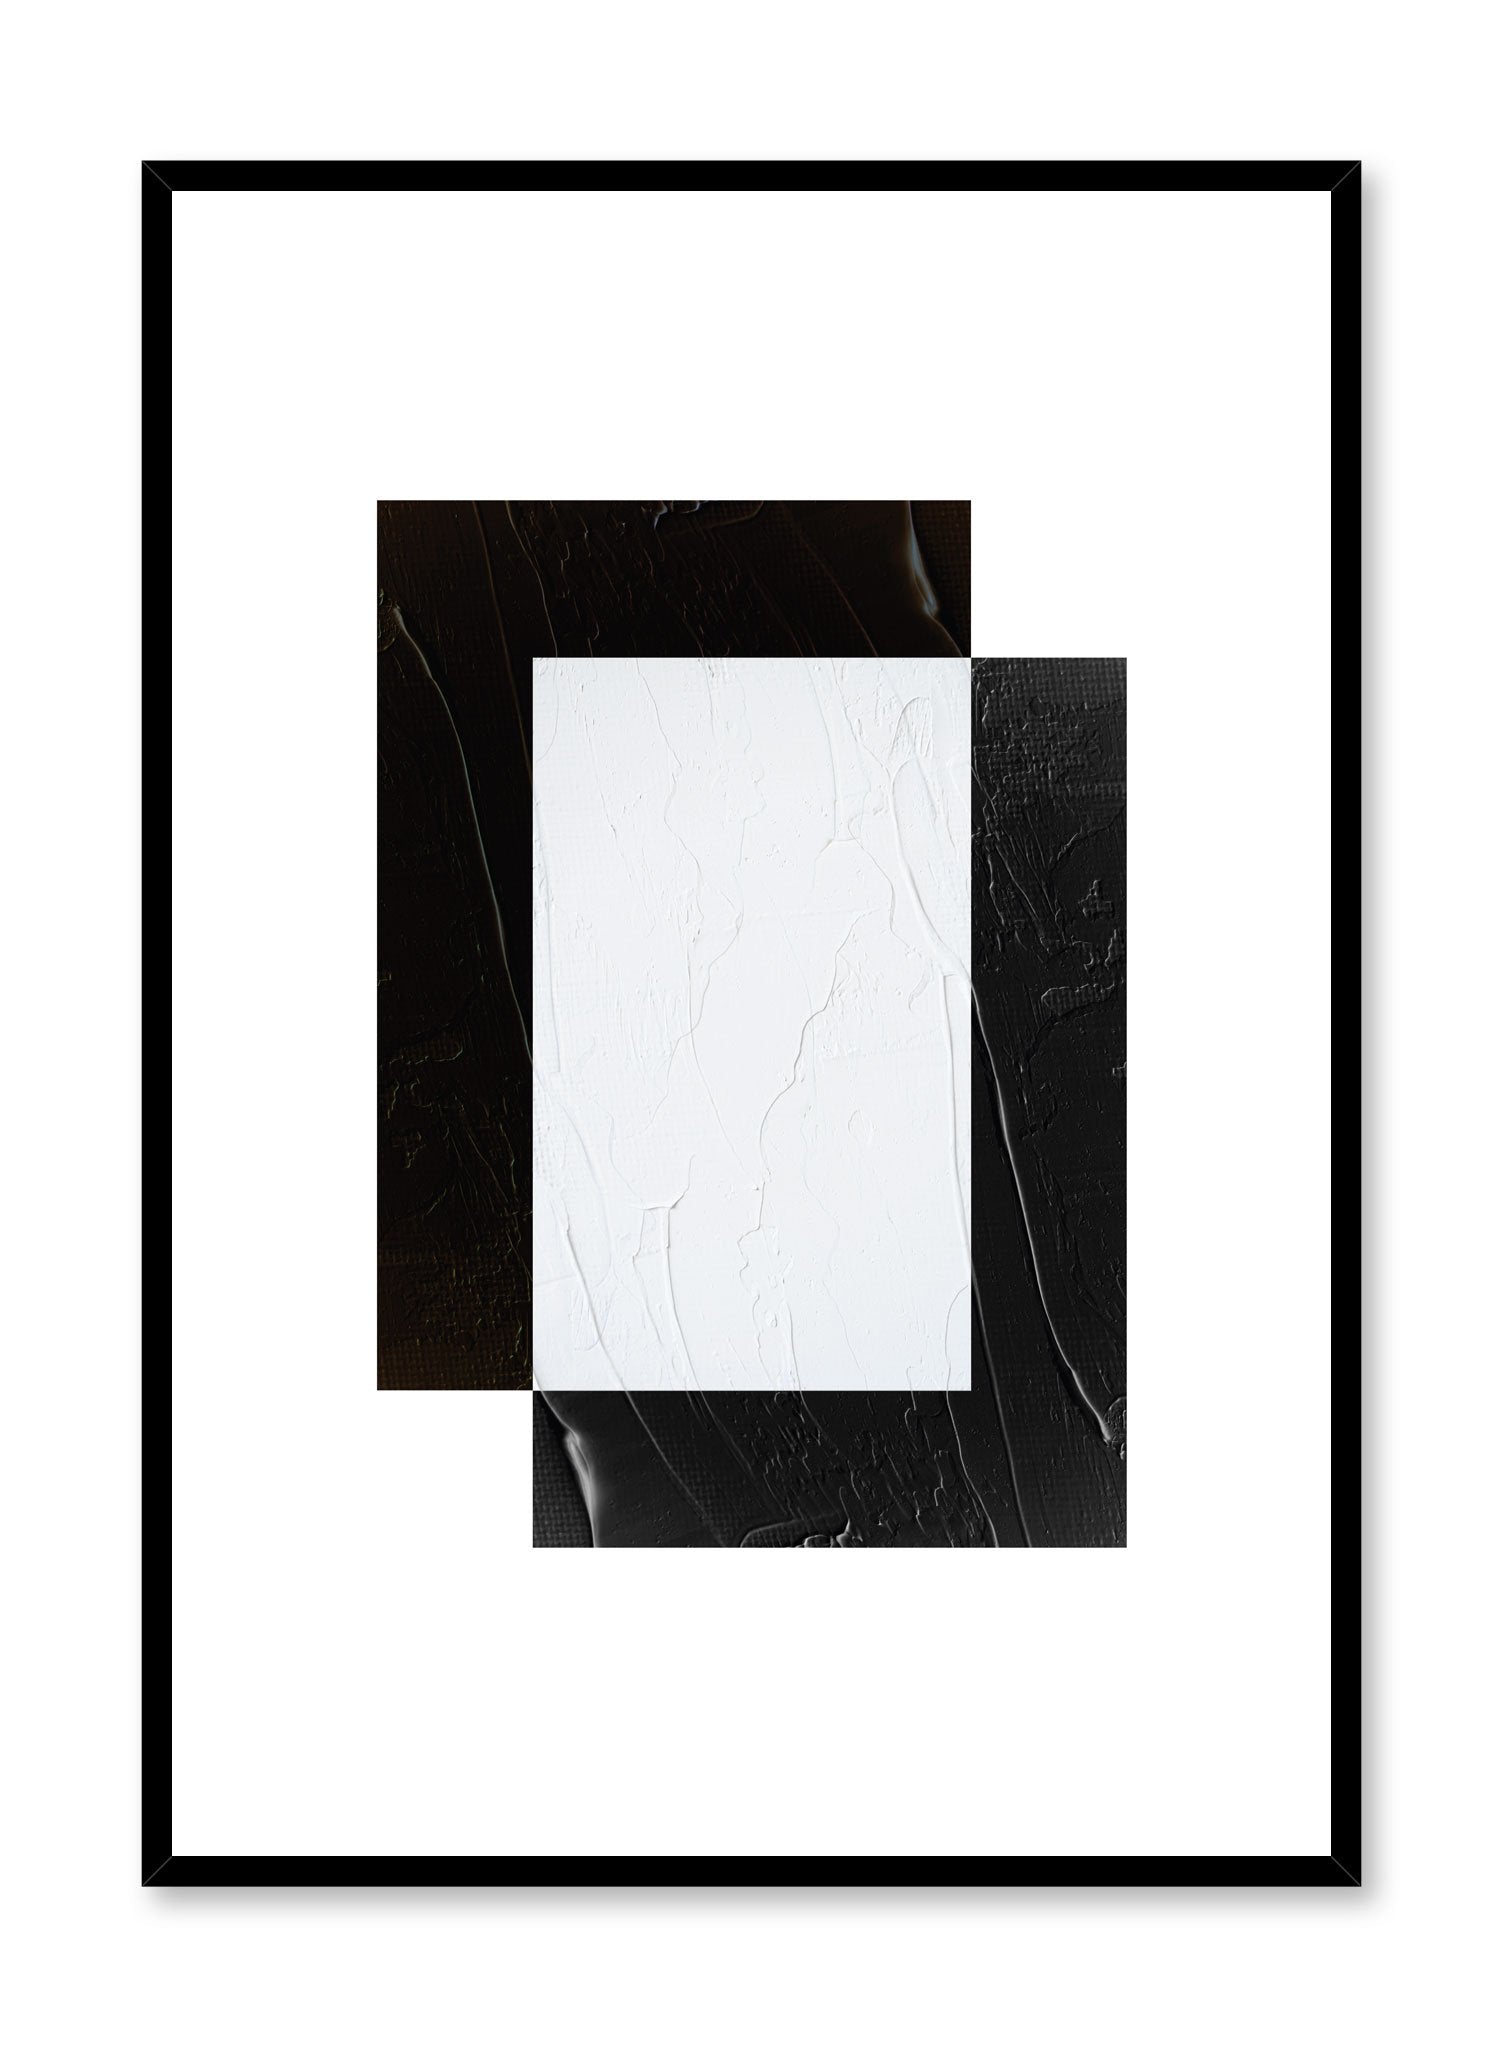 Minimalist design poster by Opposite Wall with abstract square shapes